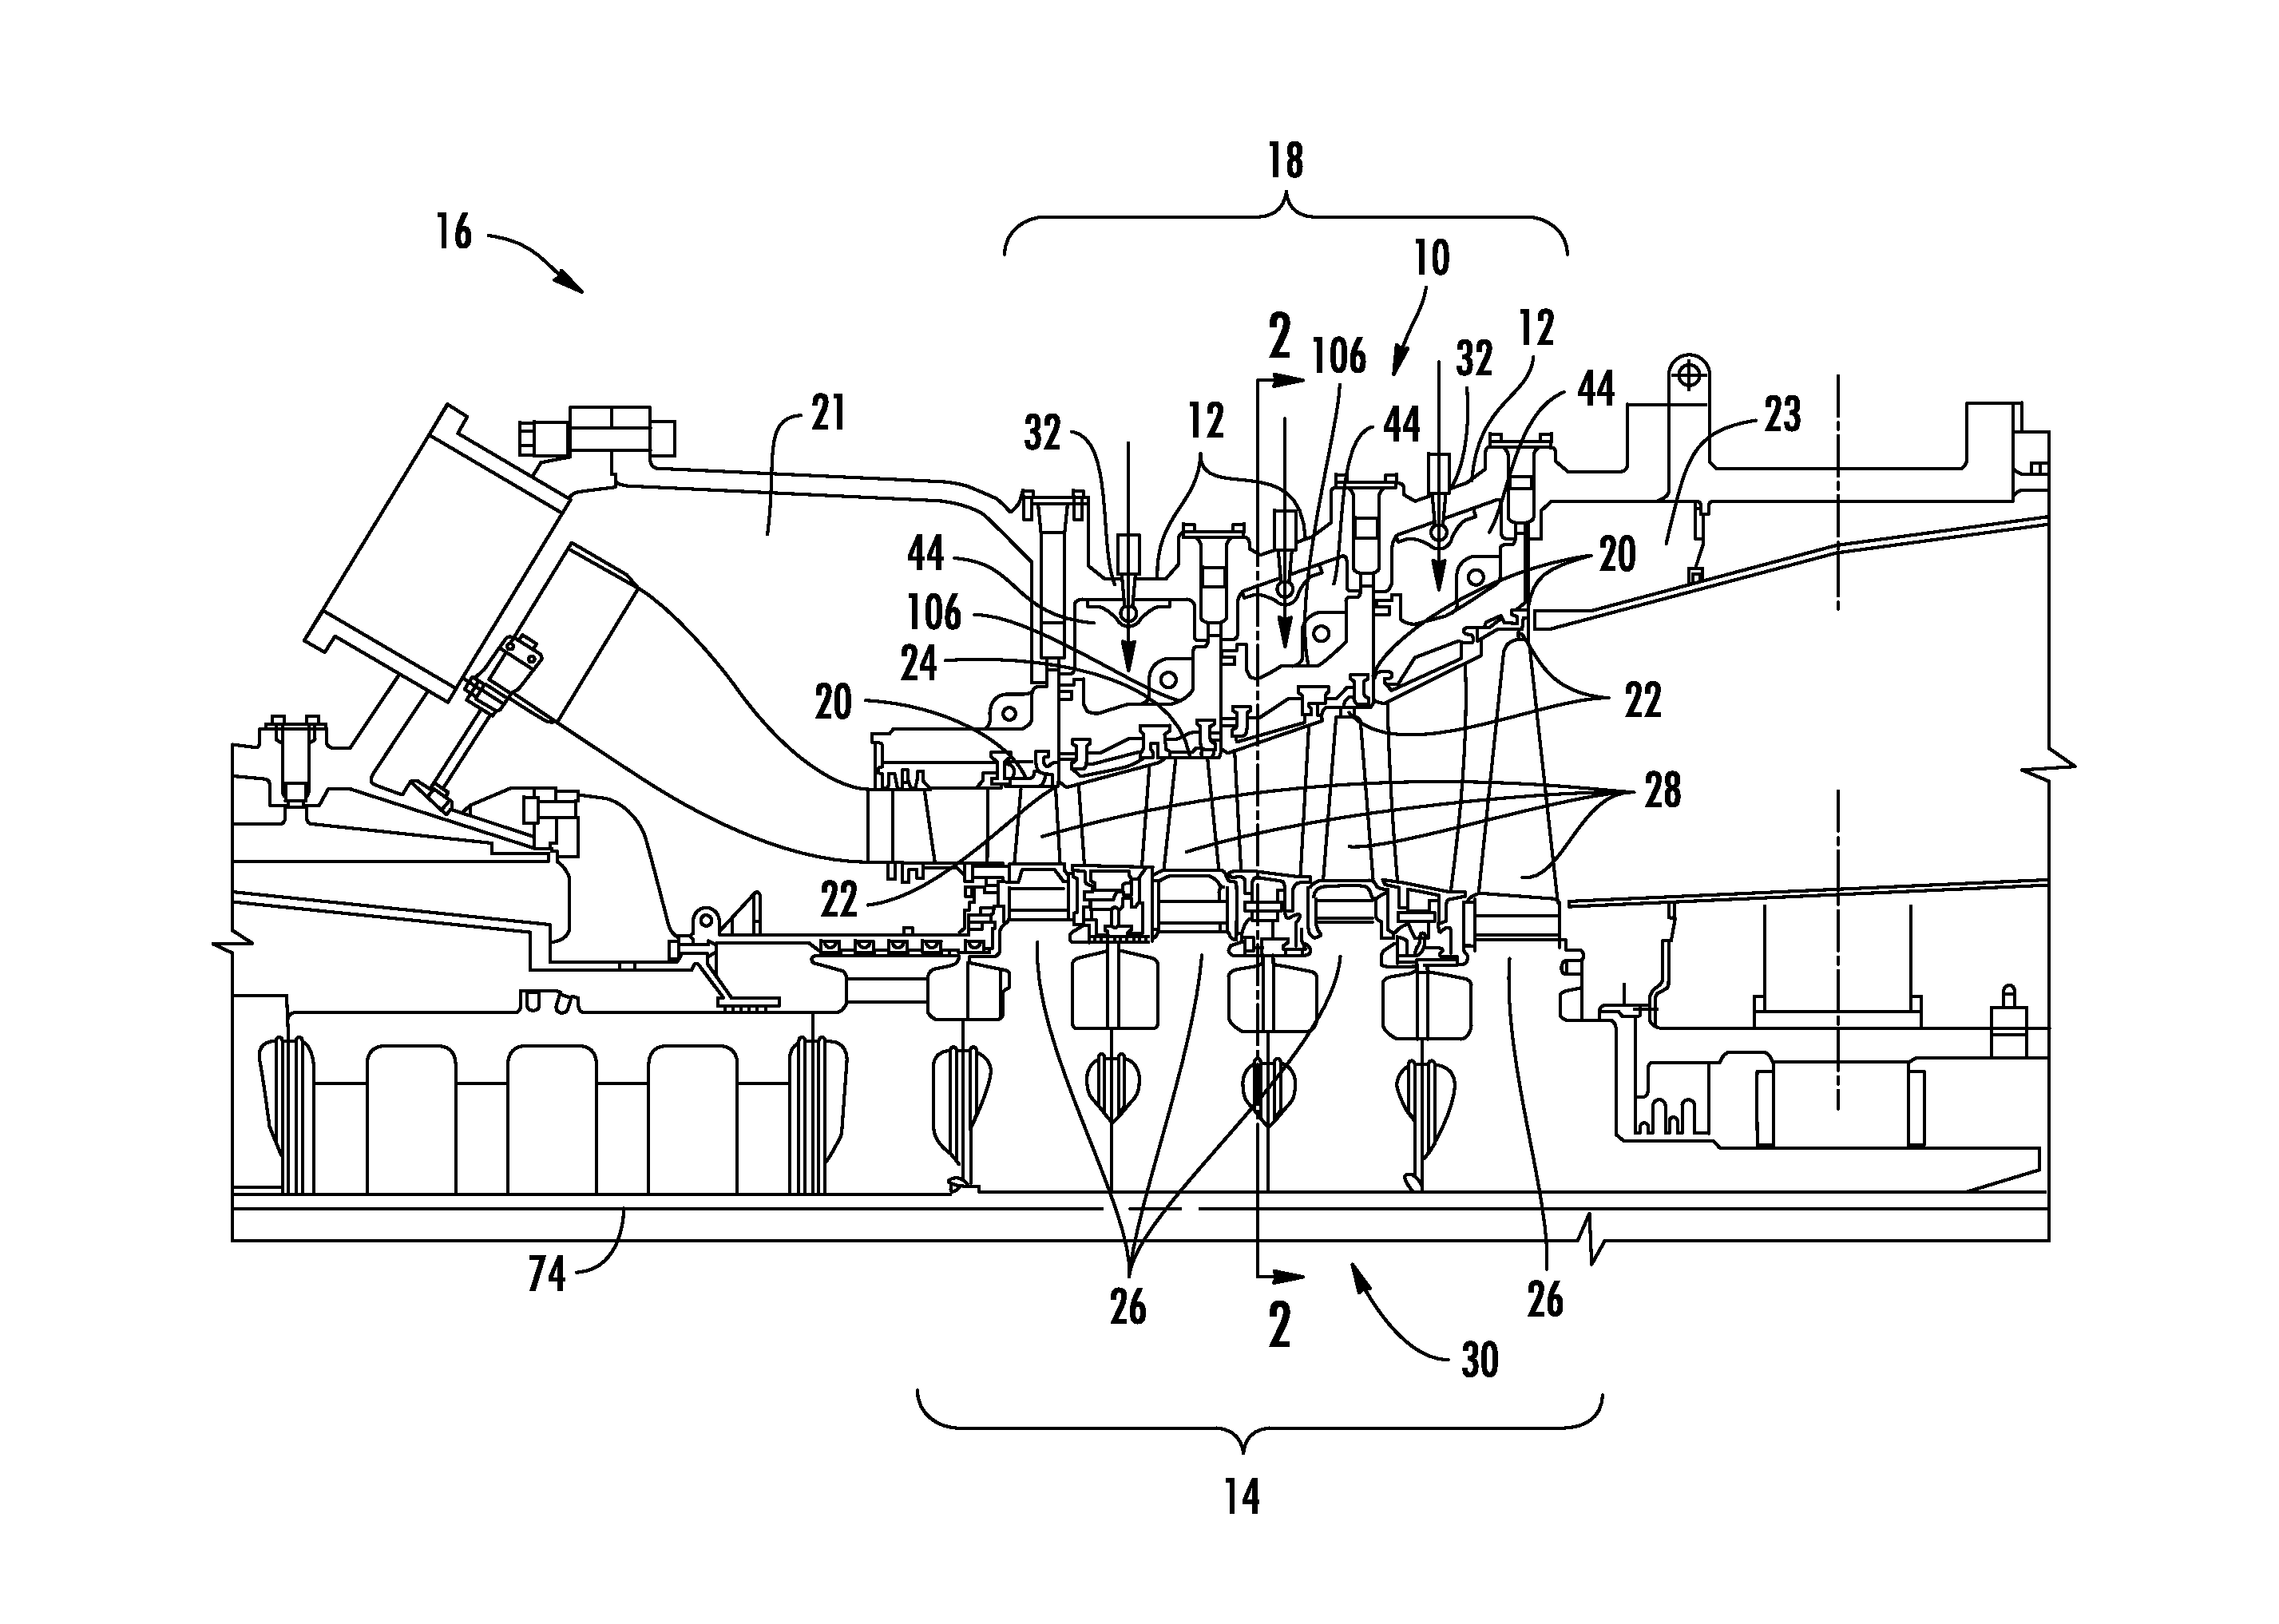 Turbine engine temperature control system with heating element for a gas turbine engine